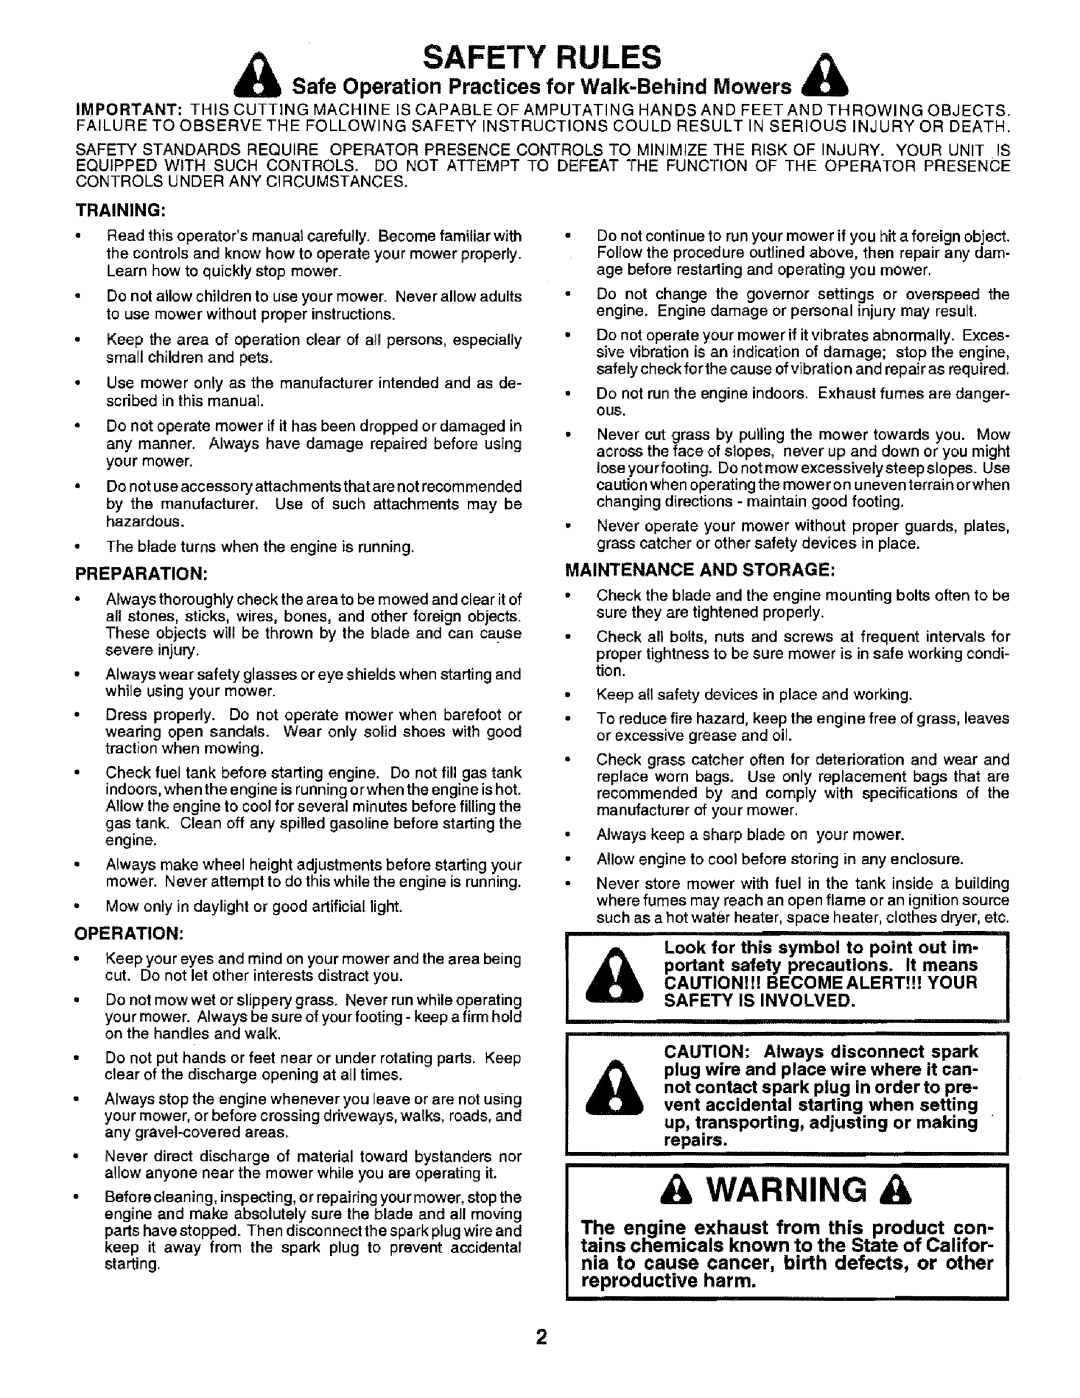 Sears 14.3, 975502 Safety Rules, Safe Operation Practices for Walk-BehindMowers, Training, Preparation, reproductive harm 